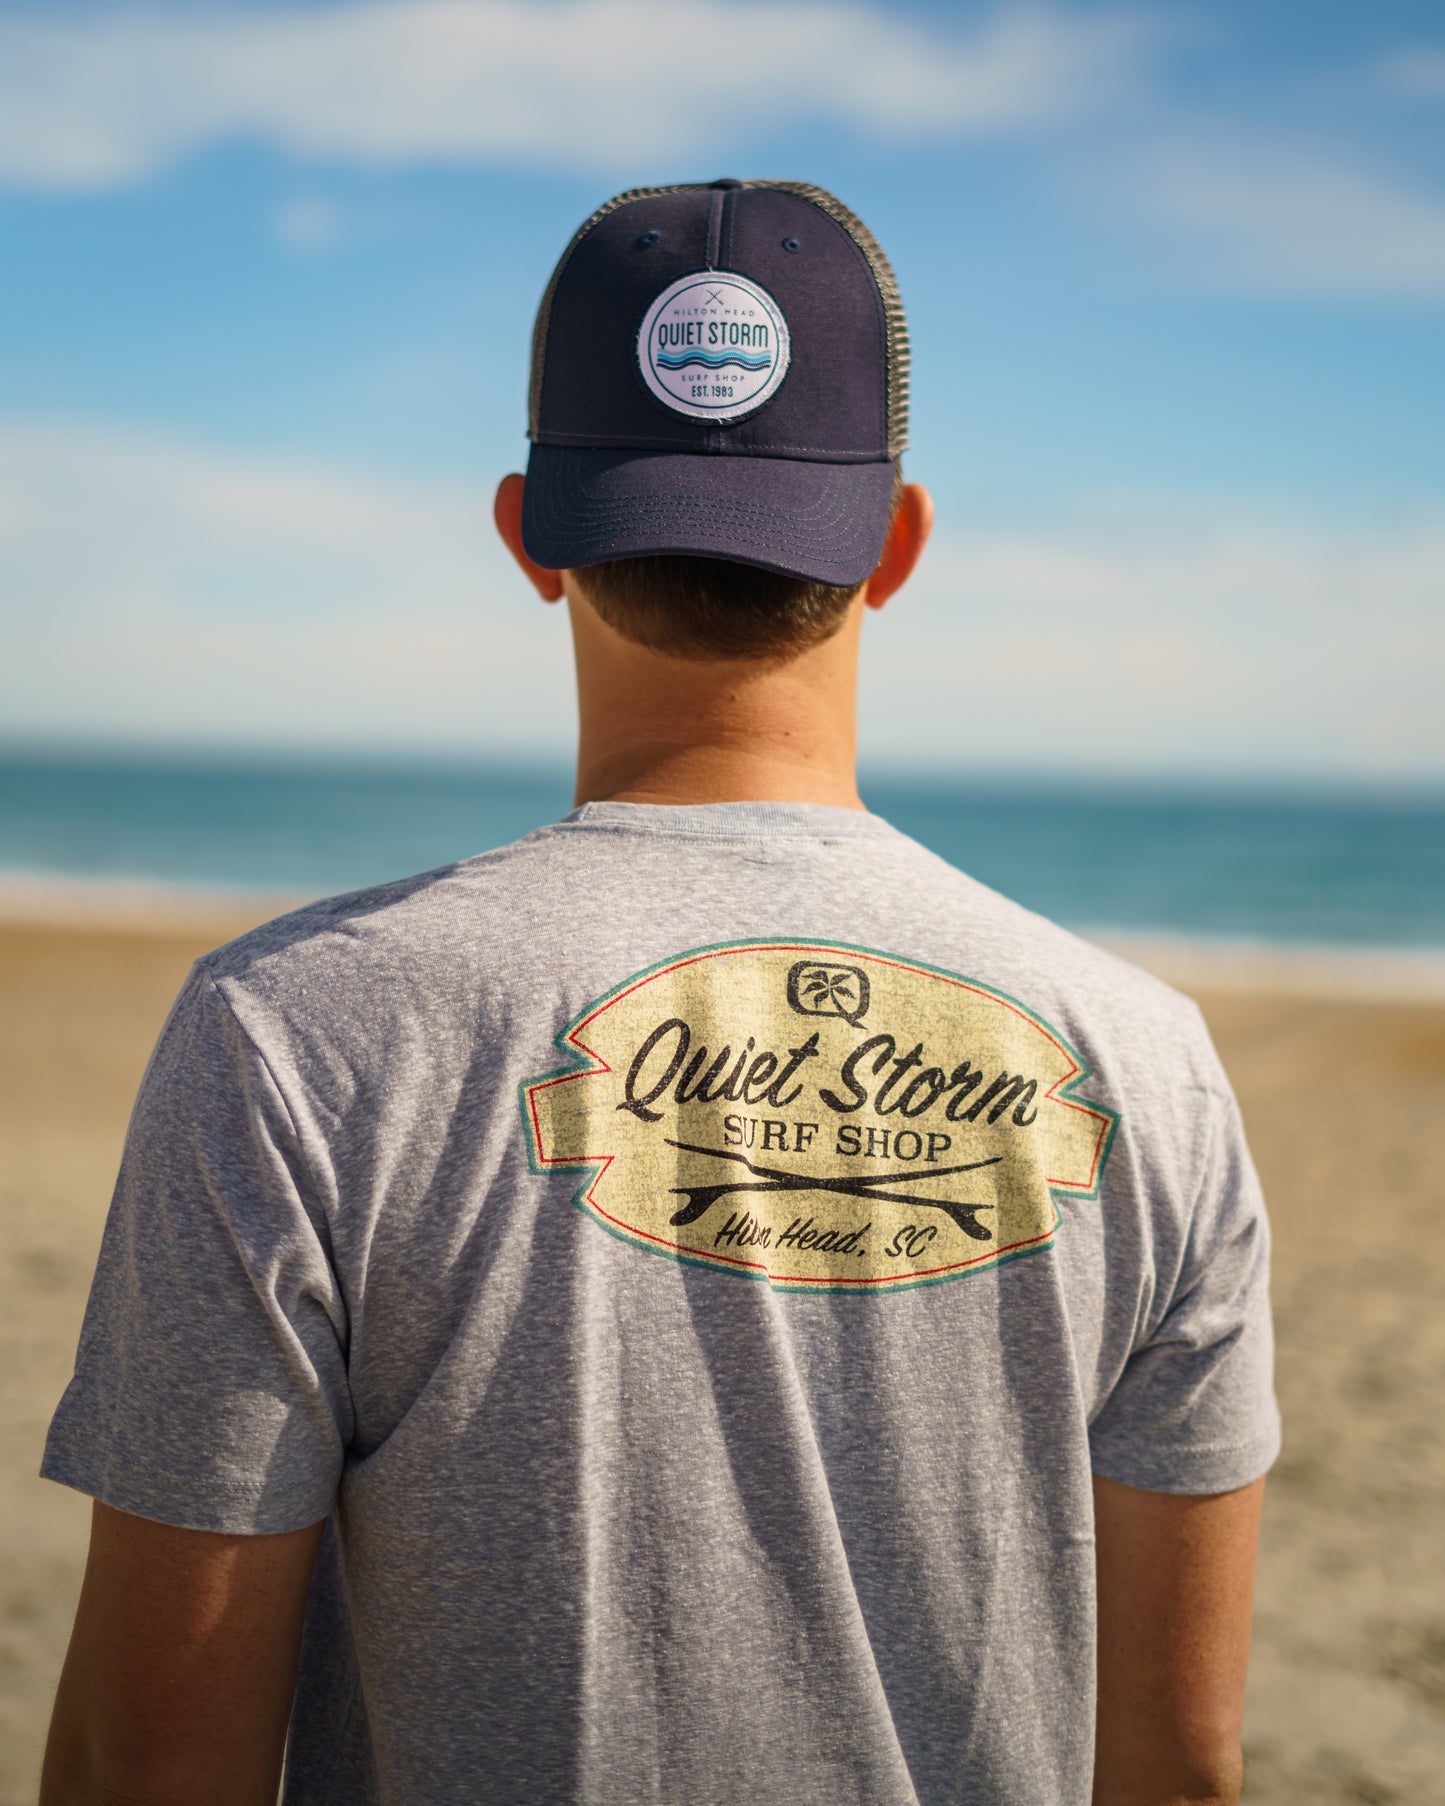 Man at beach wearing a hat and Graphic T shirt that has a design of of Quiet Storm Surf shop with two surf boards crossing underneath with Hilton Head, SC below